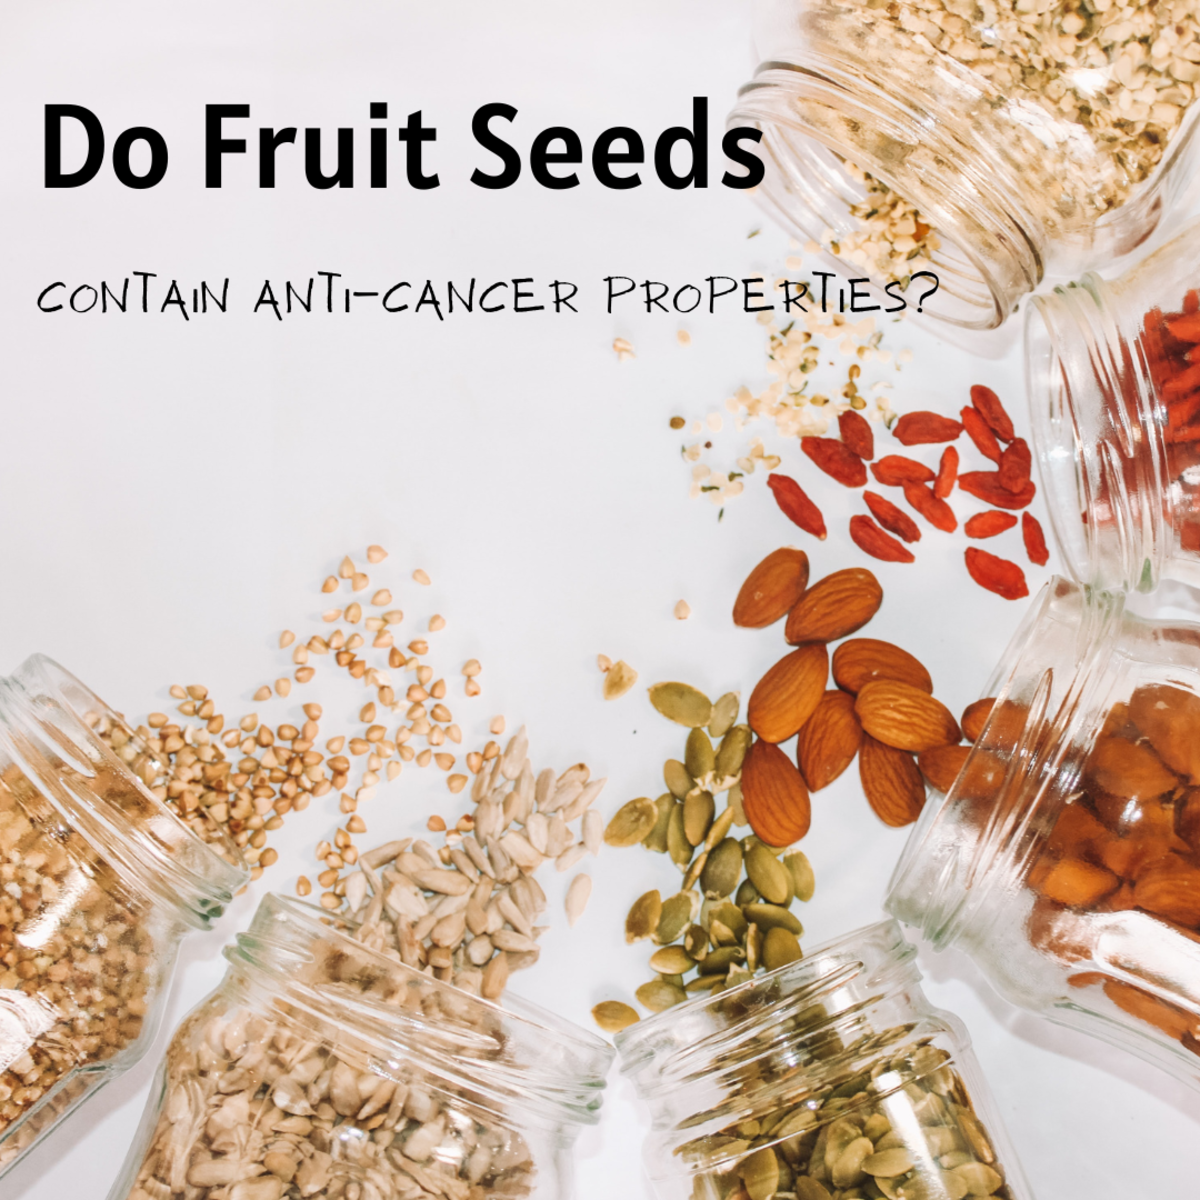 Can fruit seeds cure cancer?